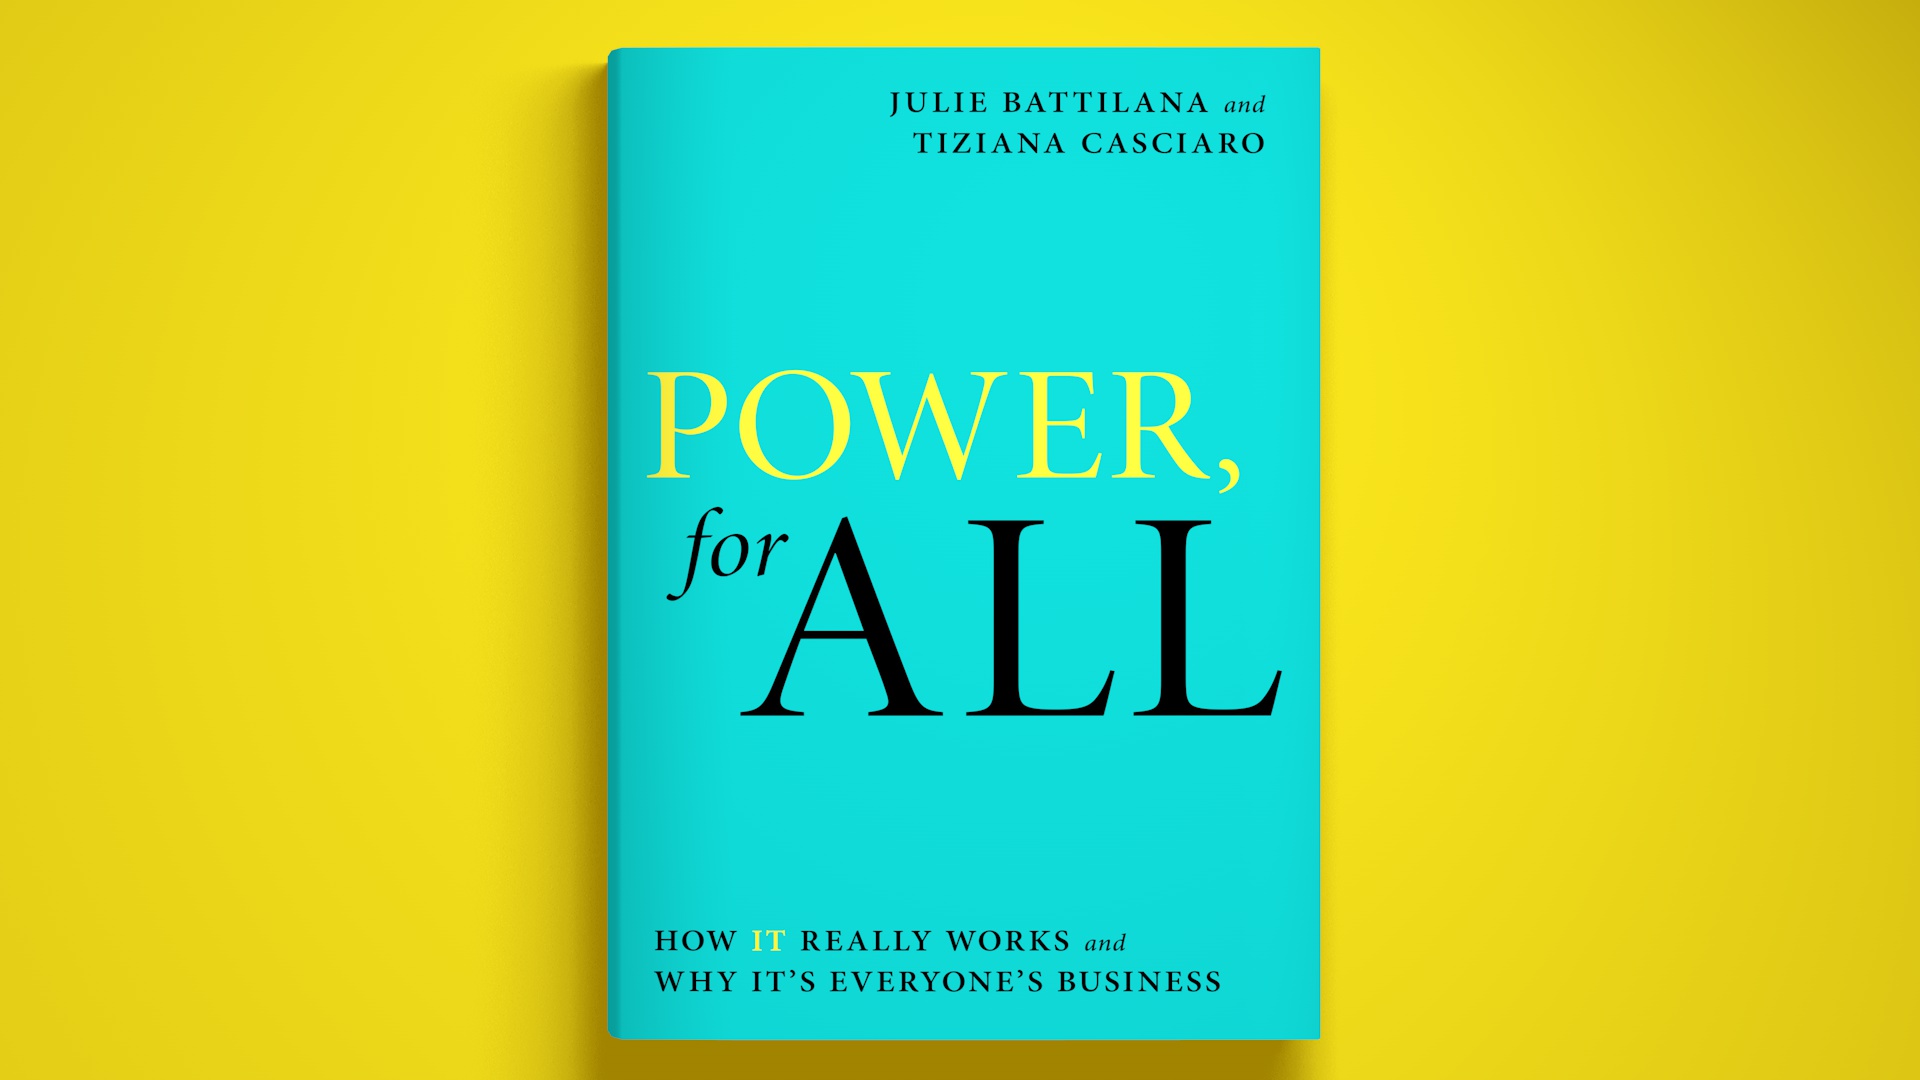 Power, for All: How It Really Works and Why It's Everyone's Business (Simon & Schuster, 2021)